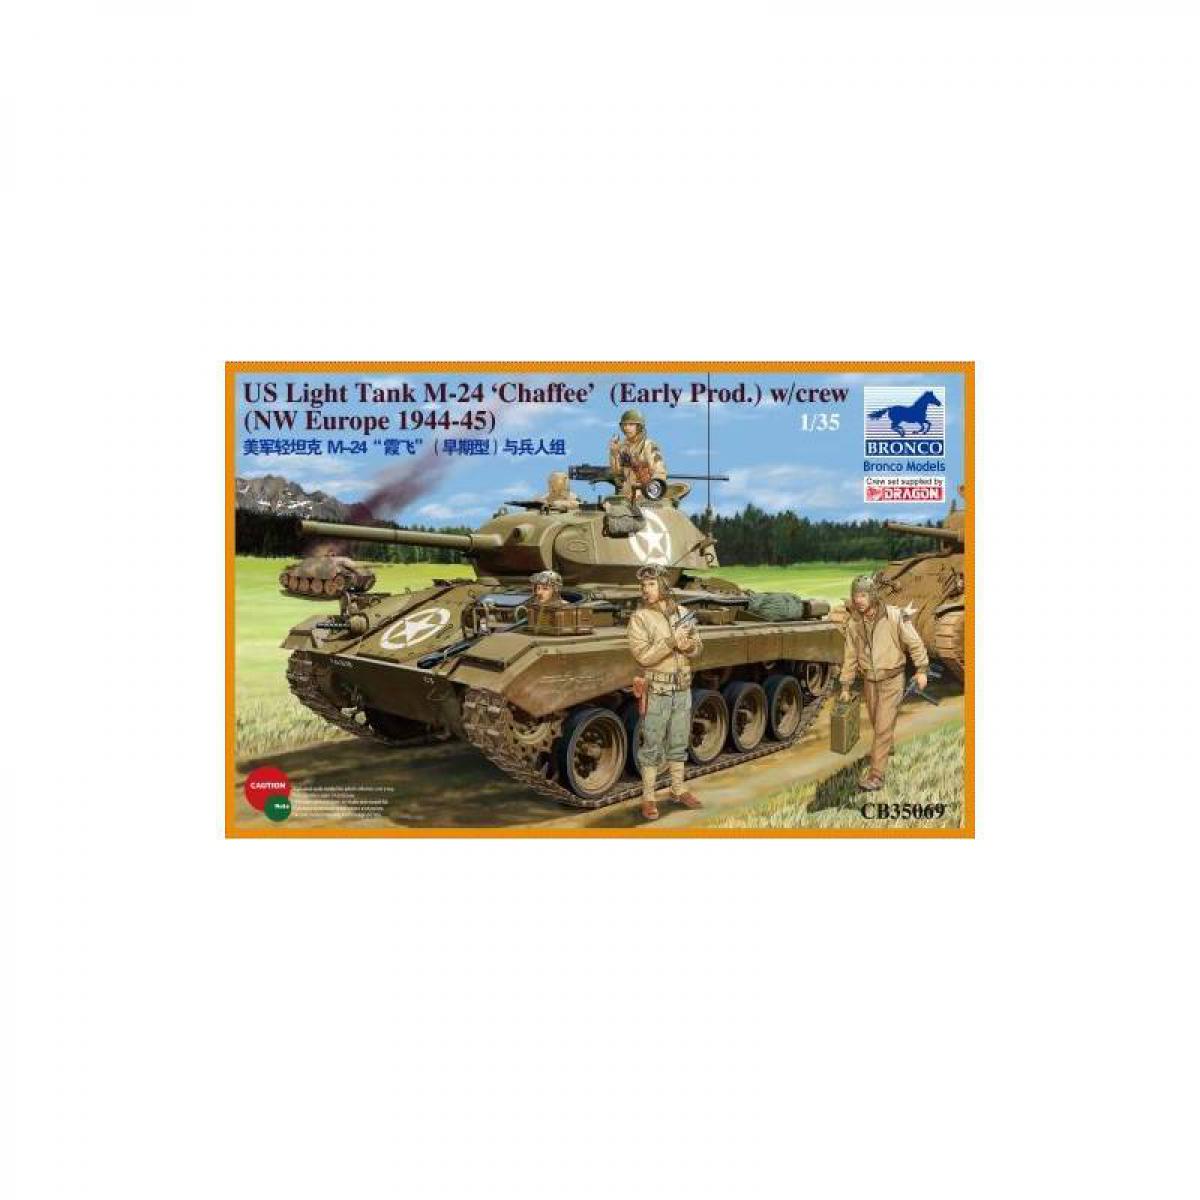 Bronco Models - Maquette Char Us Light Tank M-24 'chaffee' (early Prod.) W/crew (nw Europe 1944-45) - Chars